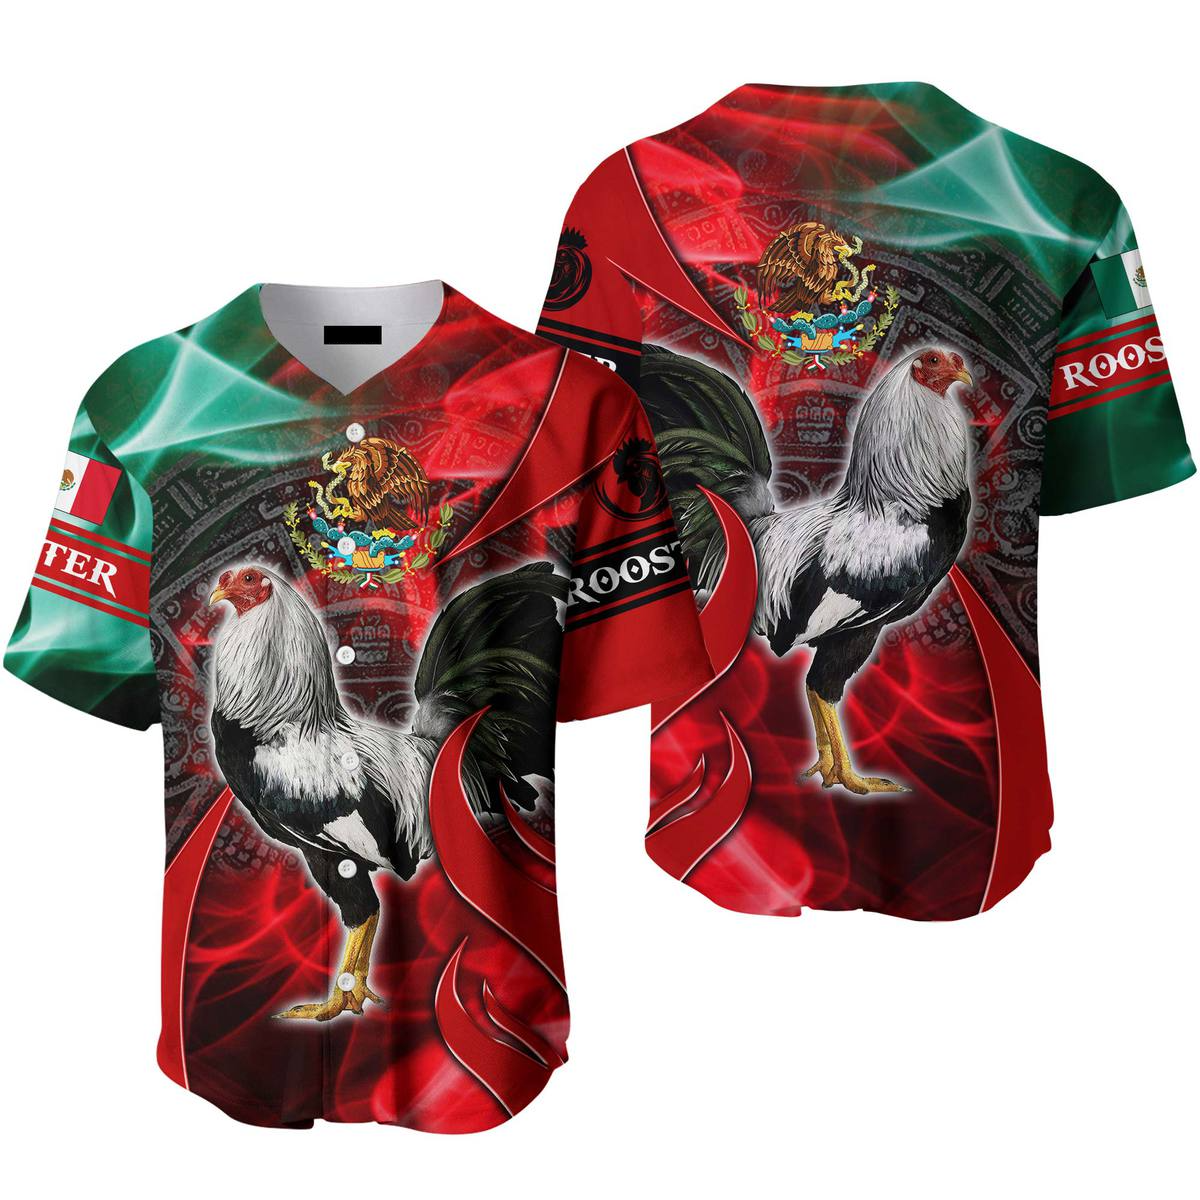 Rooster Mexico - Gift For Mexicans/ Mexico Lovers - Red And Green Baseball Jerseys For Men & Women